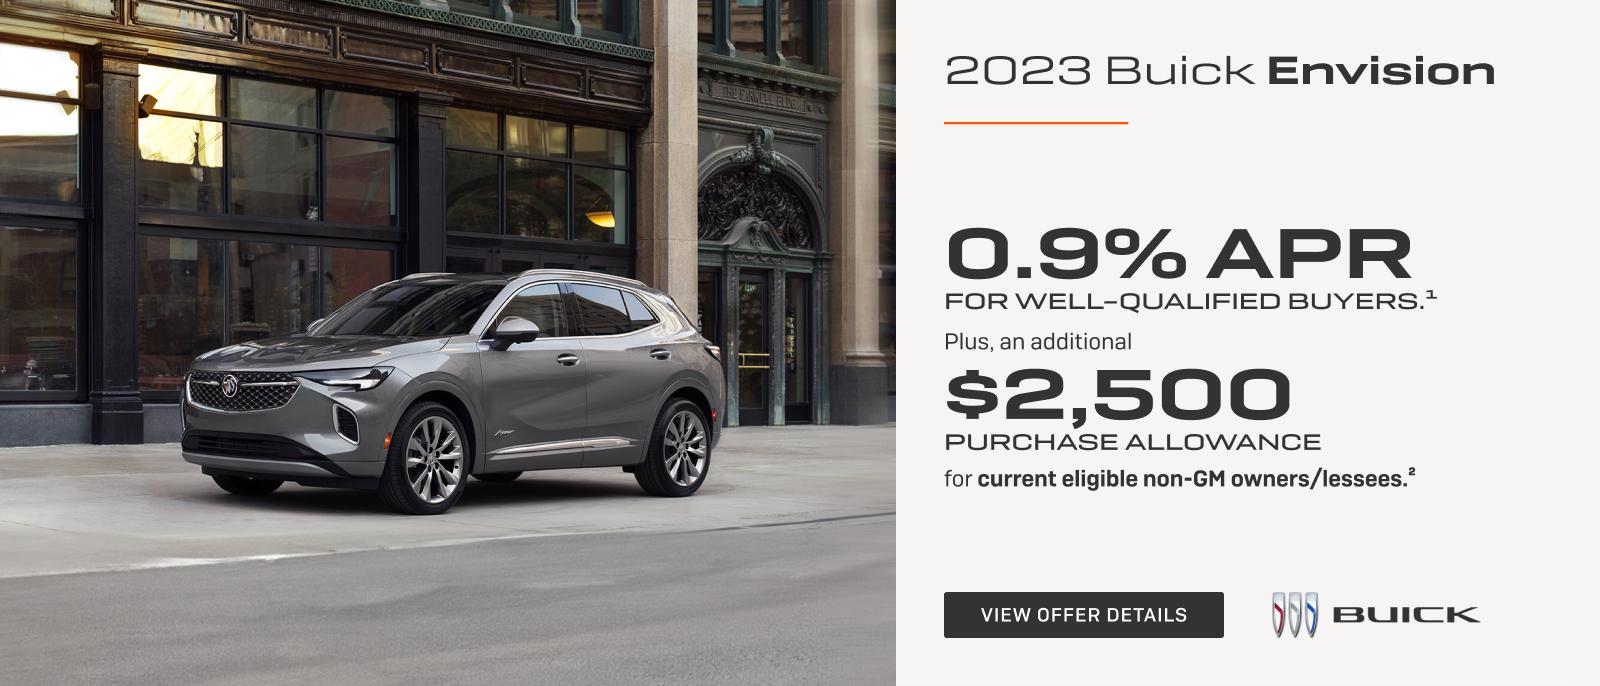 0.9% APR 
FOR WELL-QUALIFIED BUYERS.1

Plus, an additional $2,500 PURCHASE ALLOWANCE for current eligible non-GM owners/lessees.2